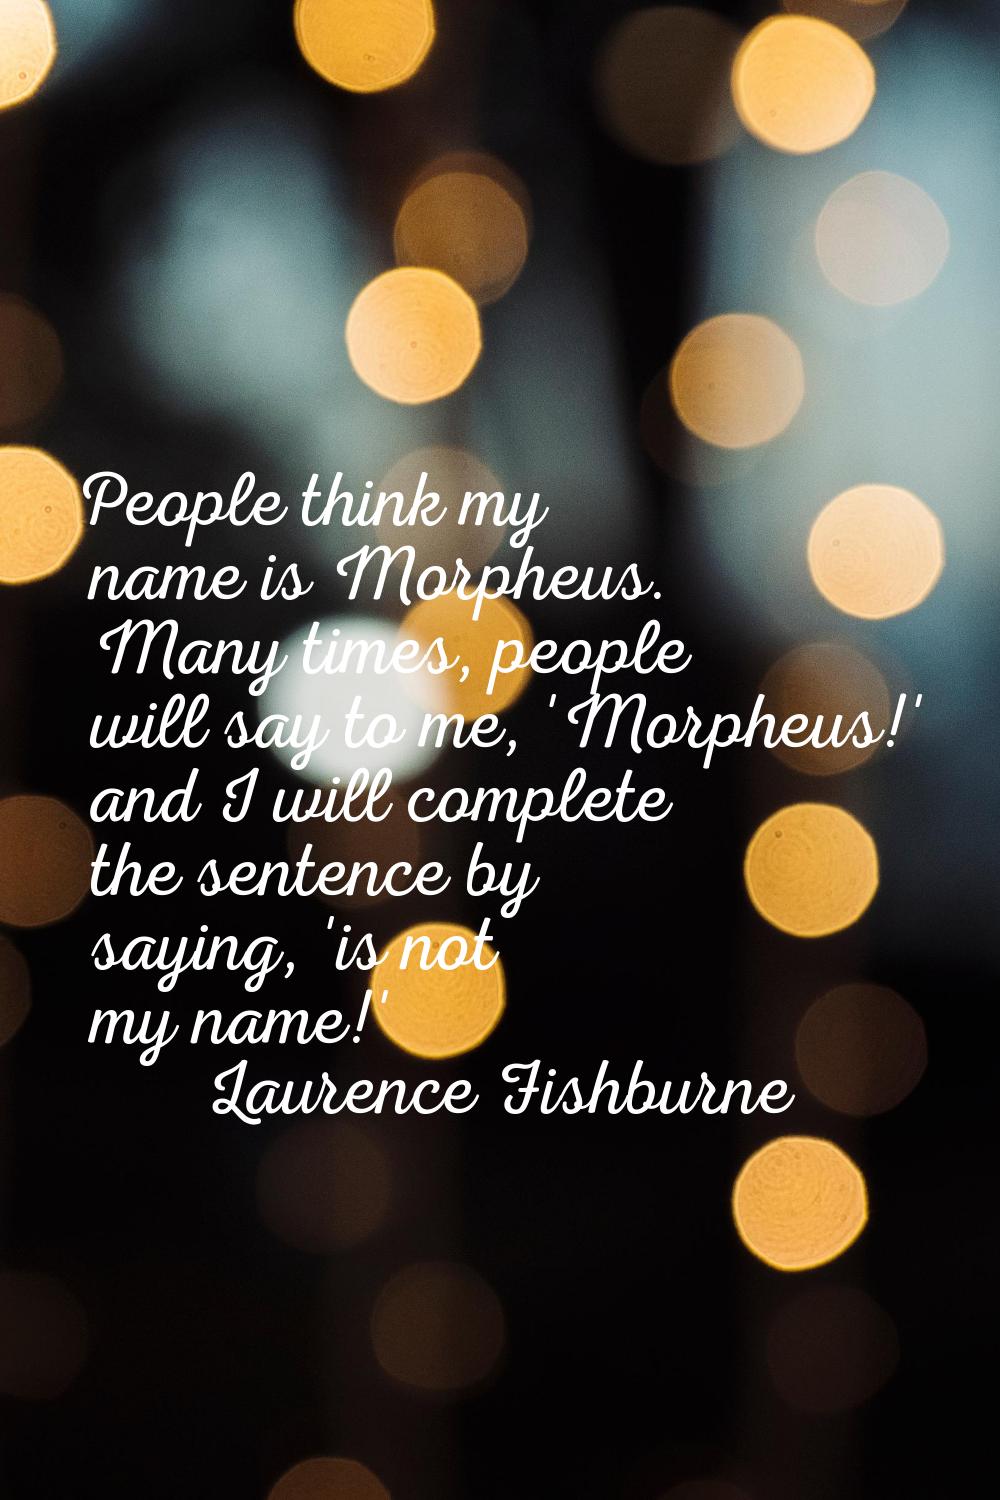 People think my name is Morpheus. Many times, people will say to me, 'Morpheus!' and I will complet